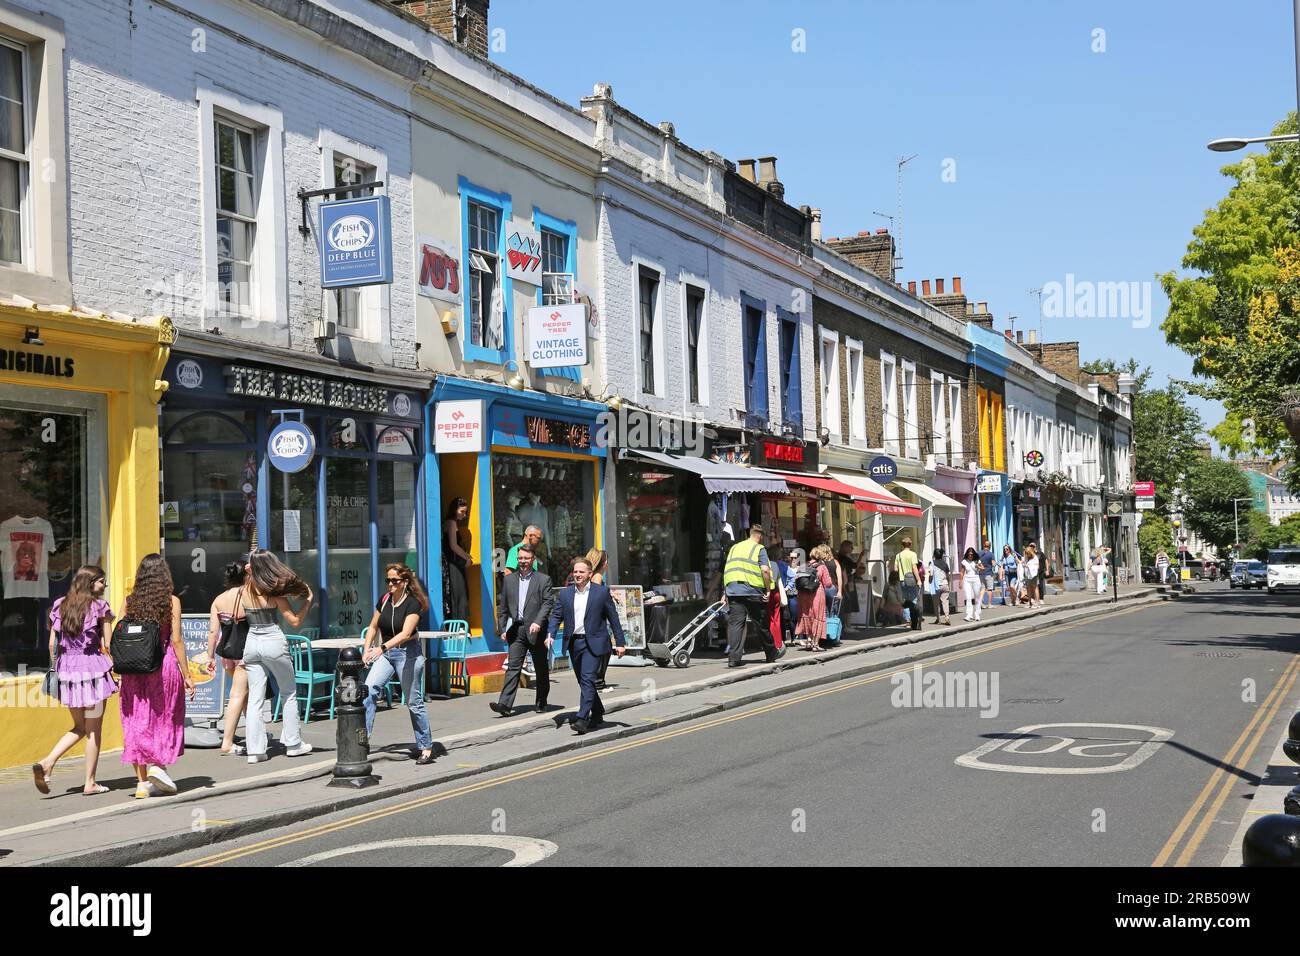 London, UK: Shops and cafes on Pembridge Road, Notting Hill Gate, one of the the wealthiest areas of London. Busy with people on a hot, summer day. Stock Photo